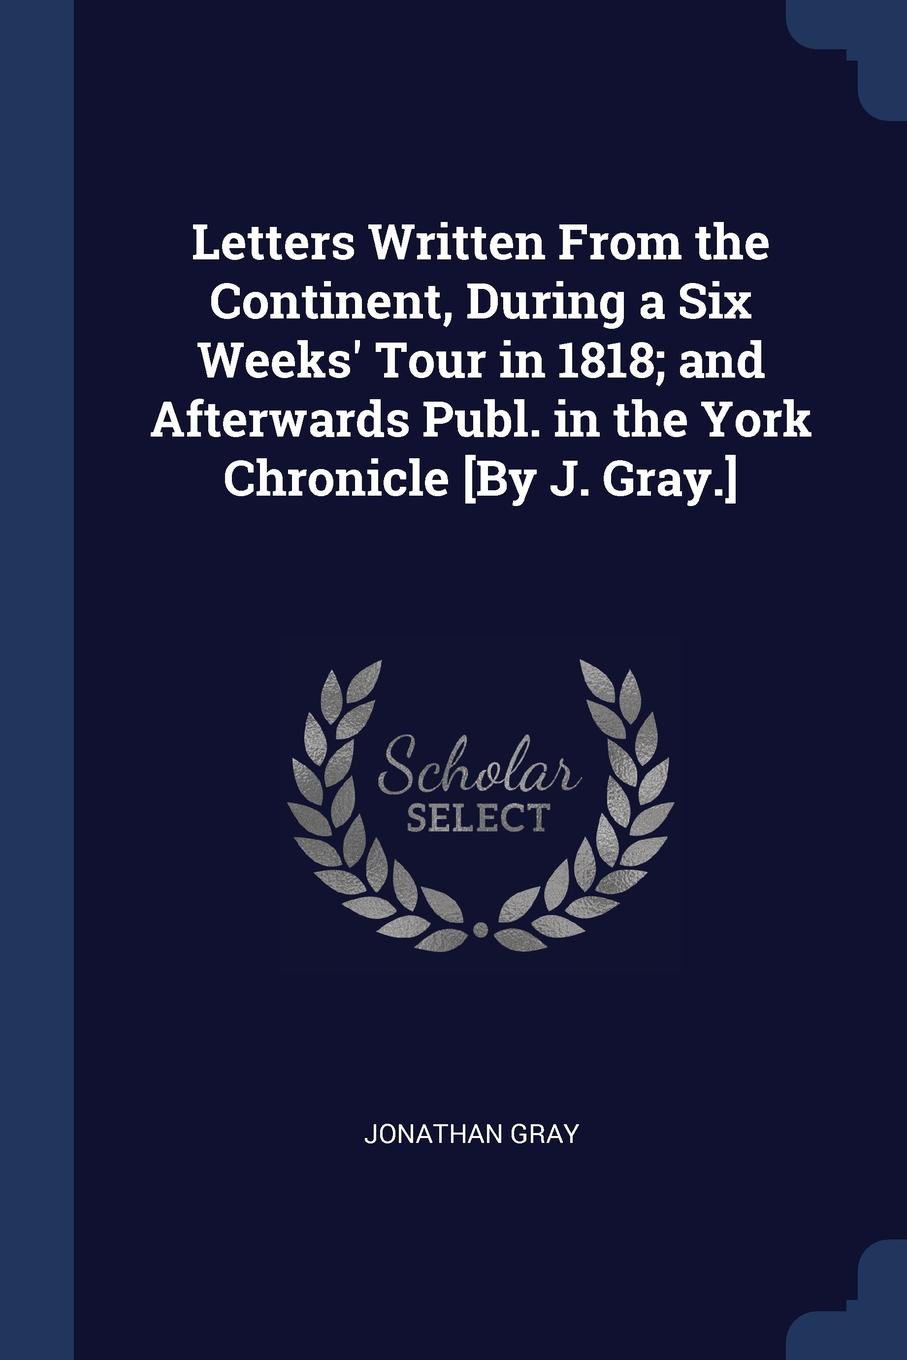 Letters Written From the Continent, During a Six Weeks. Tour in 1818; and Afterwards Publ. in the York Chronicle .By J. Gray..